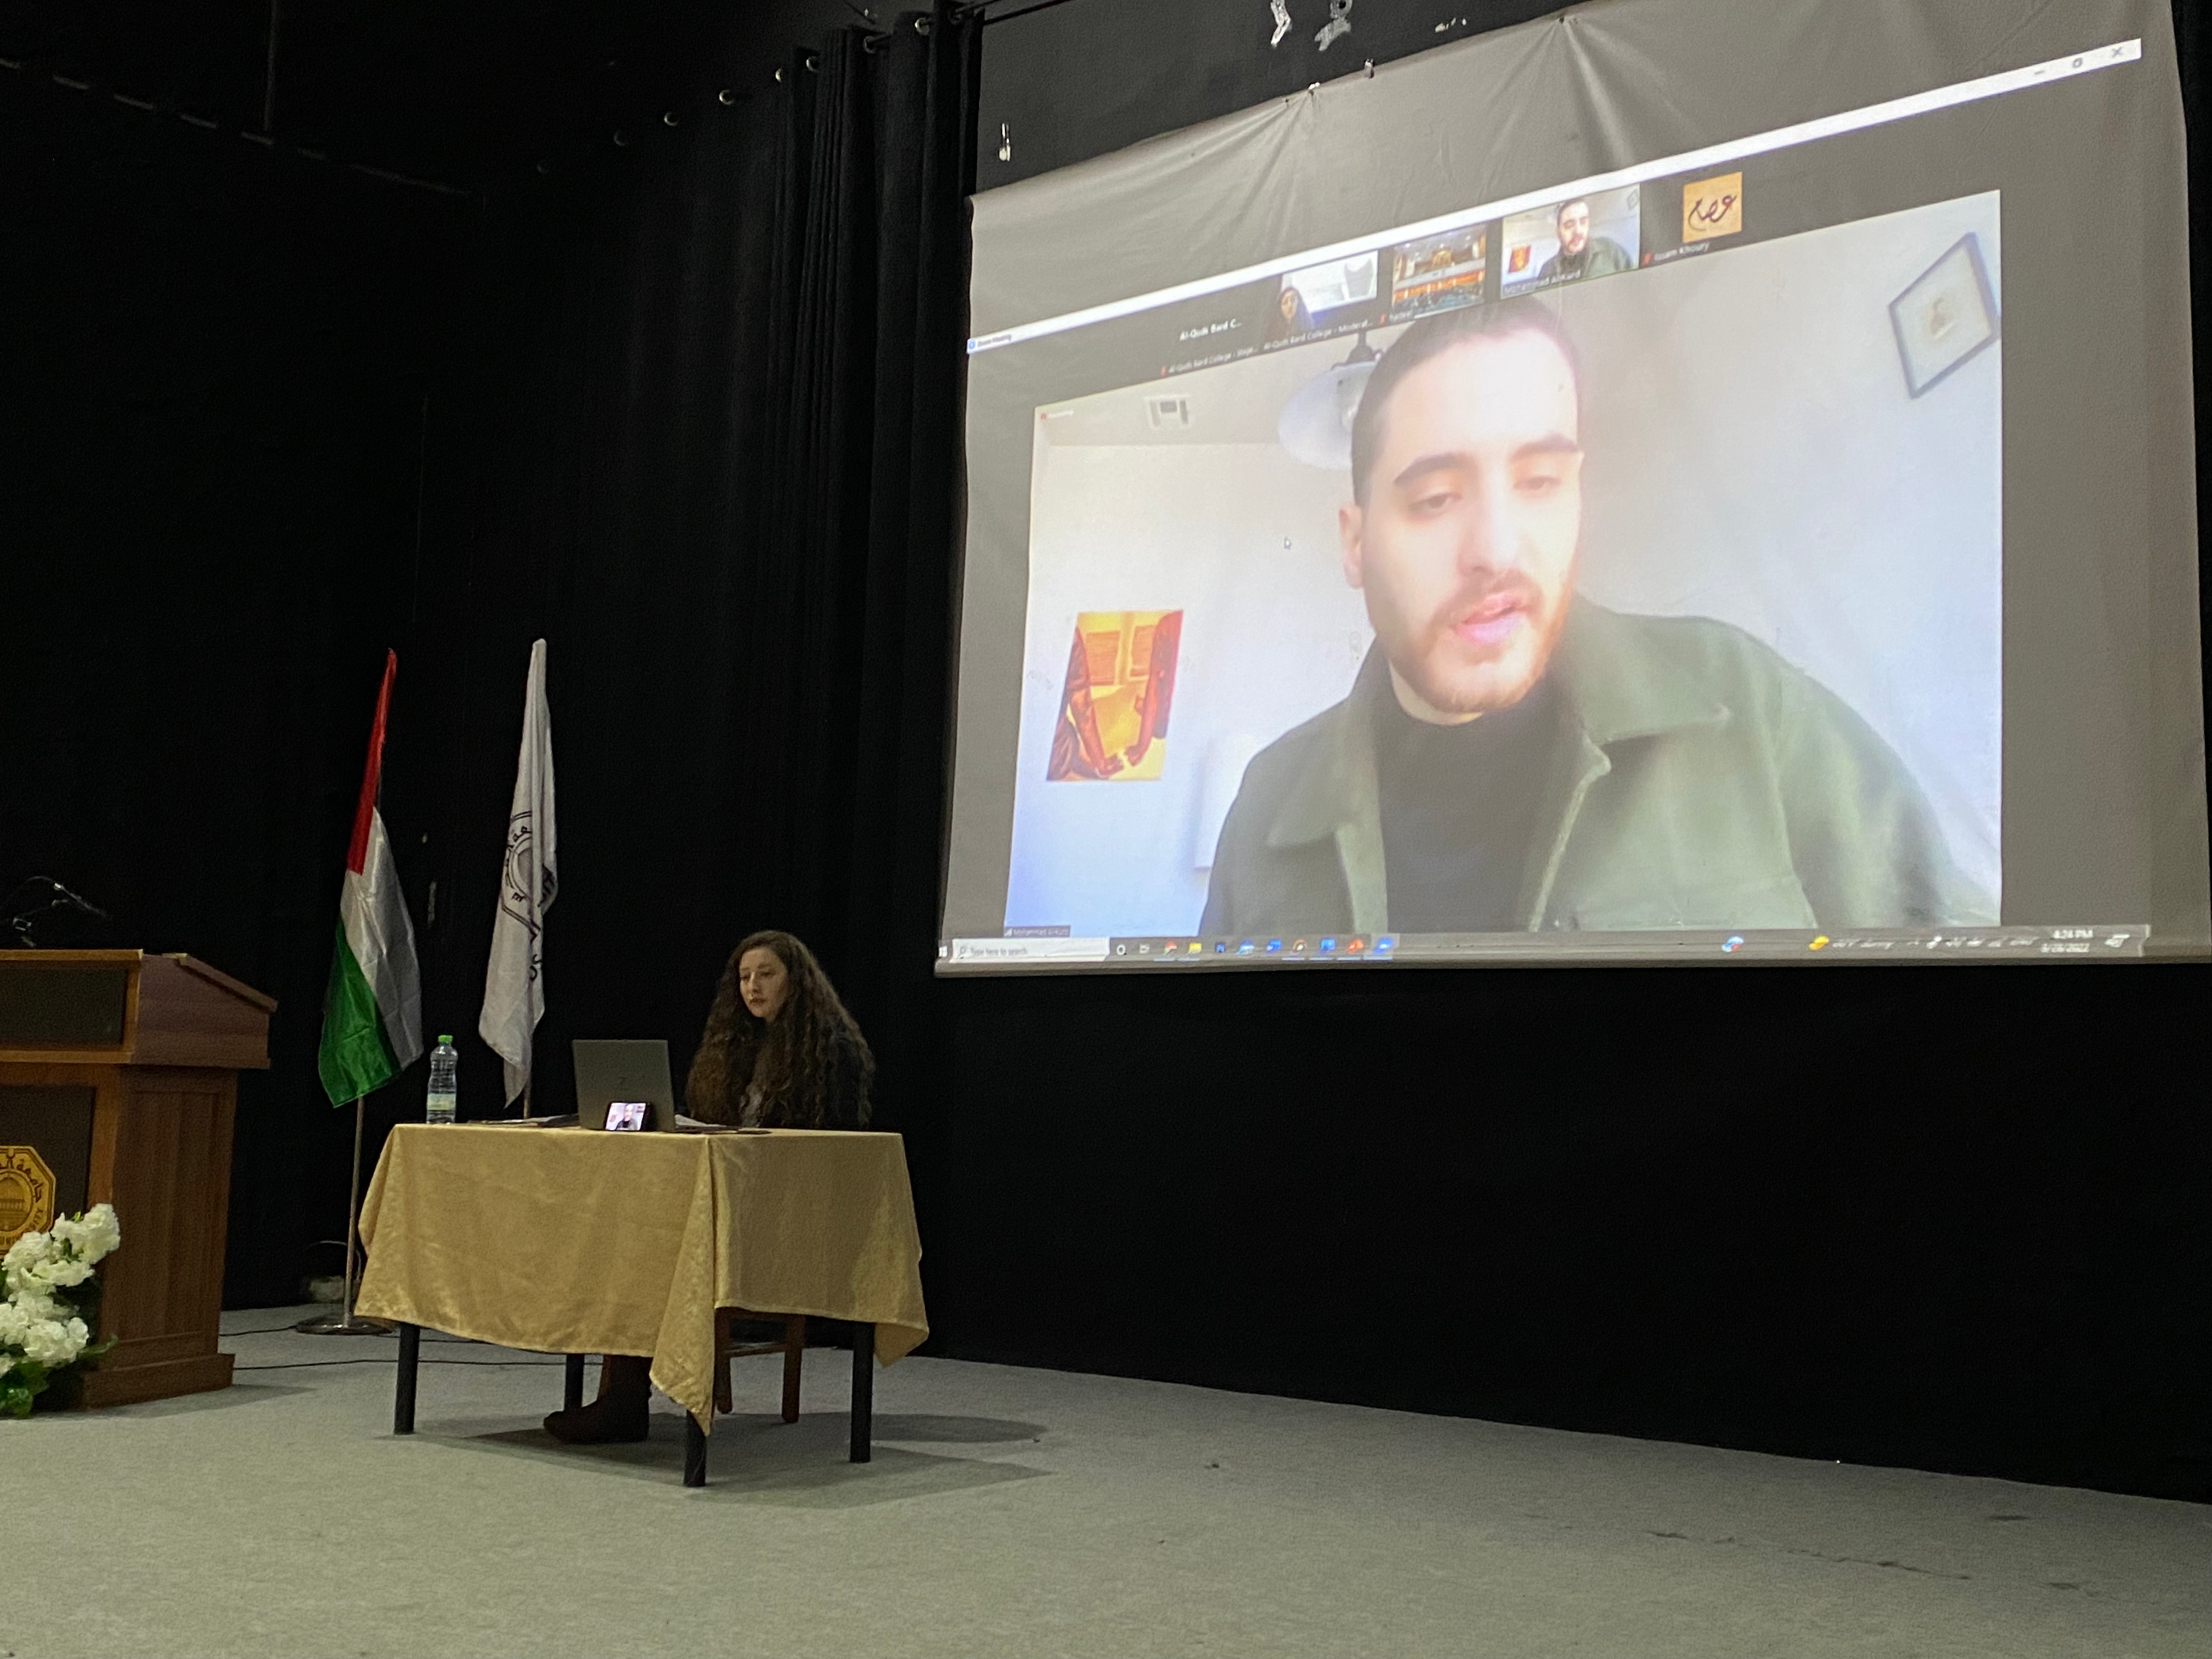 Dalia Alayassa (seated at table) and Mohammad El-Kurd (on Zoom, projected onto a large screen behind Dalia).